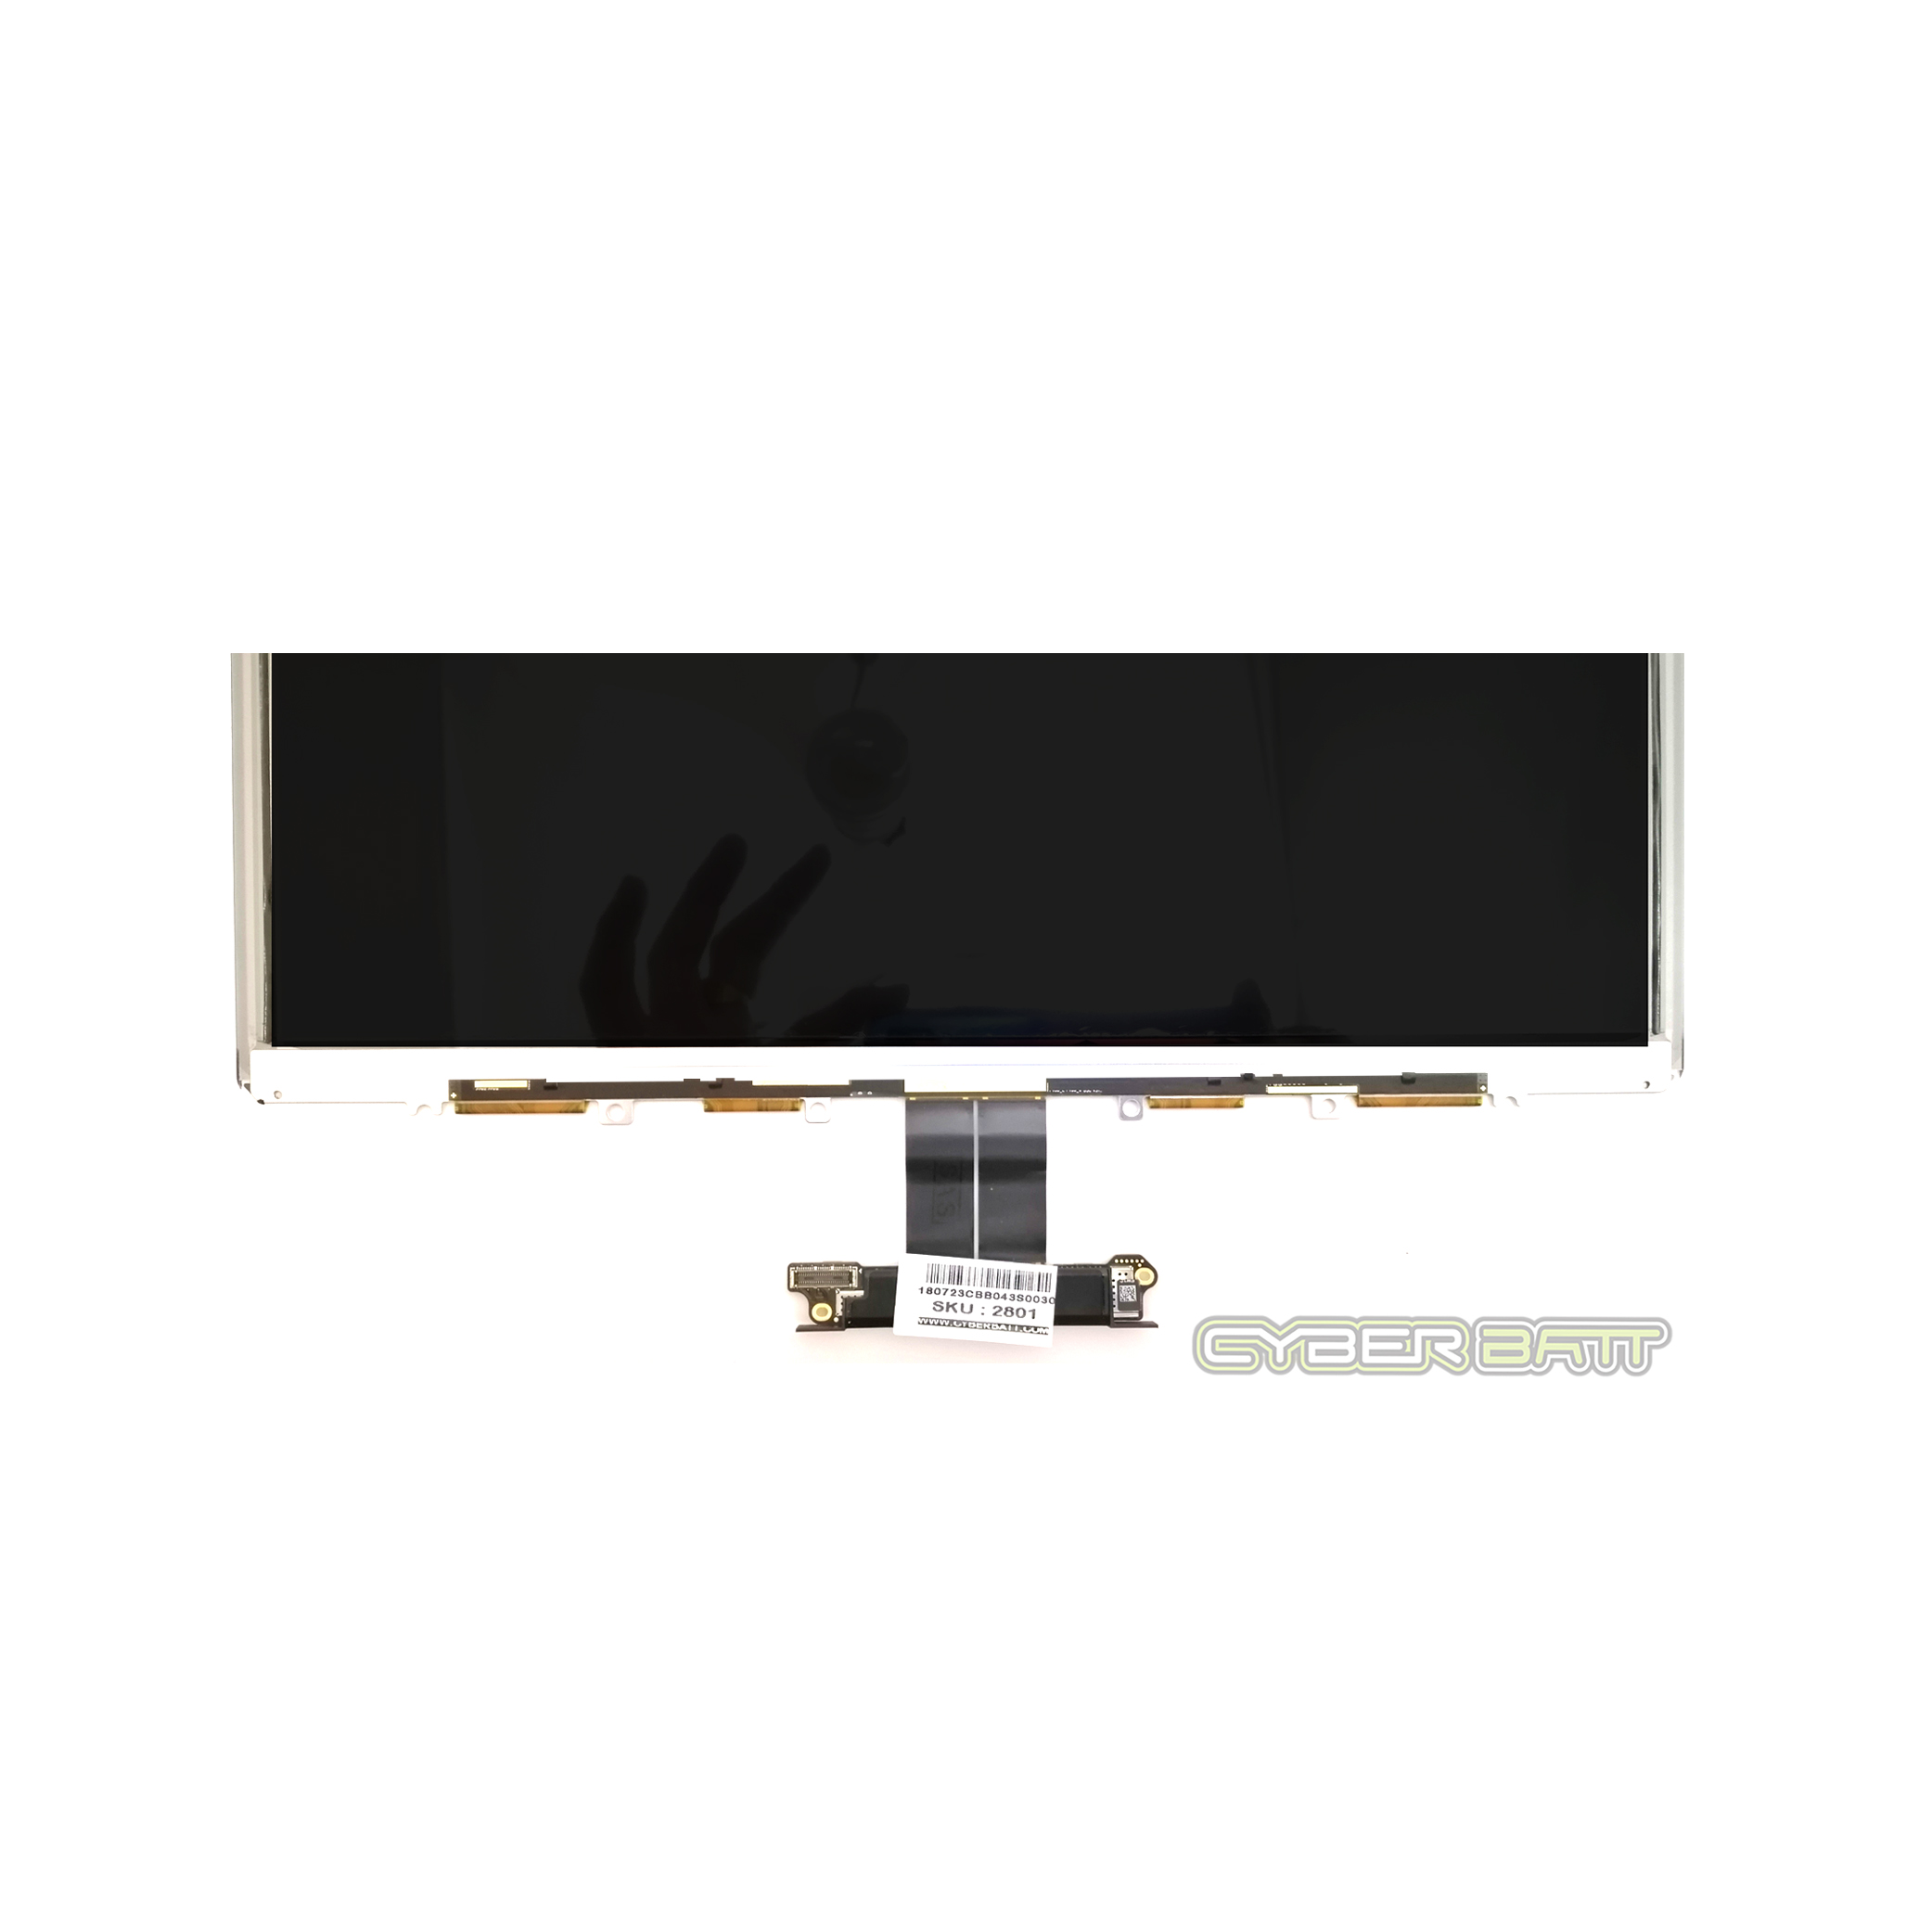 Screen Panel Macbook Retina 12 inch A1534  (Early 2015 Early 2016) 2304X1440 MF865 MF865 LSN120DL01-A01 No Case